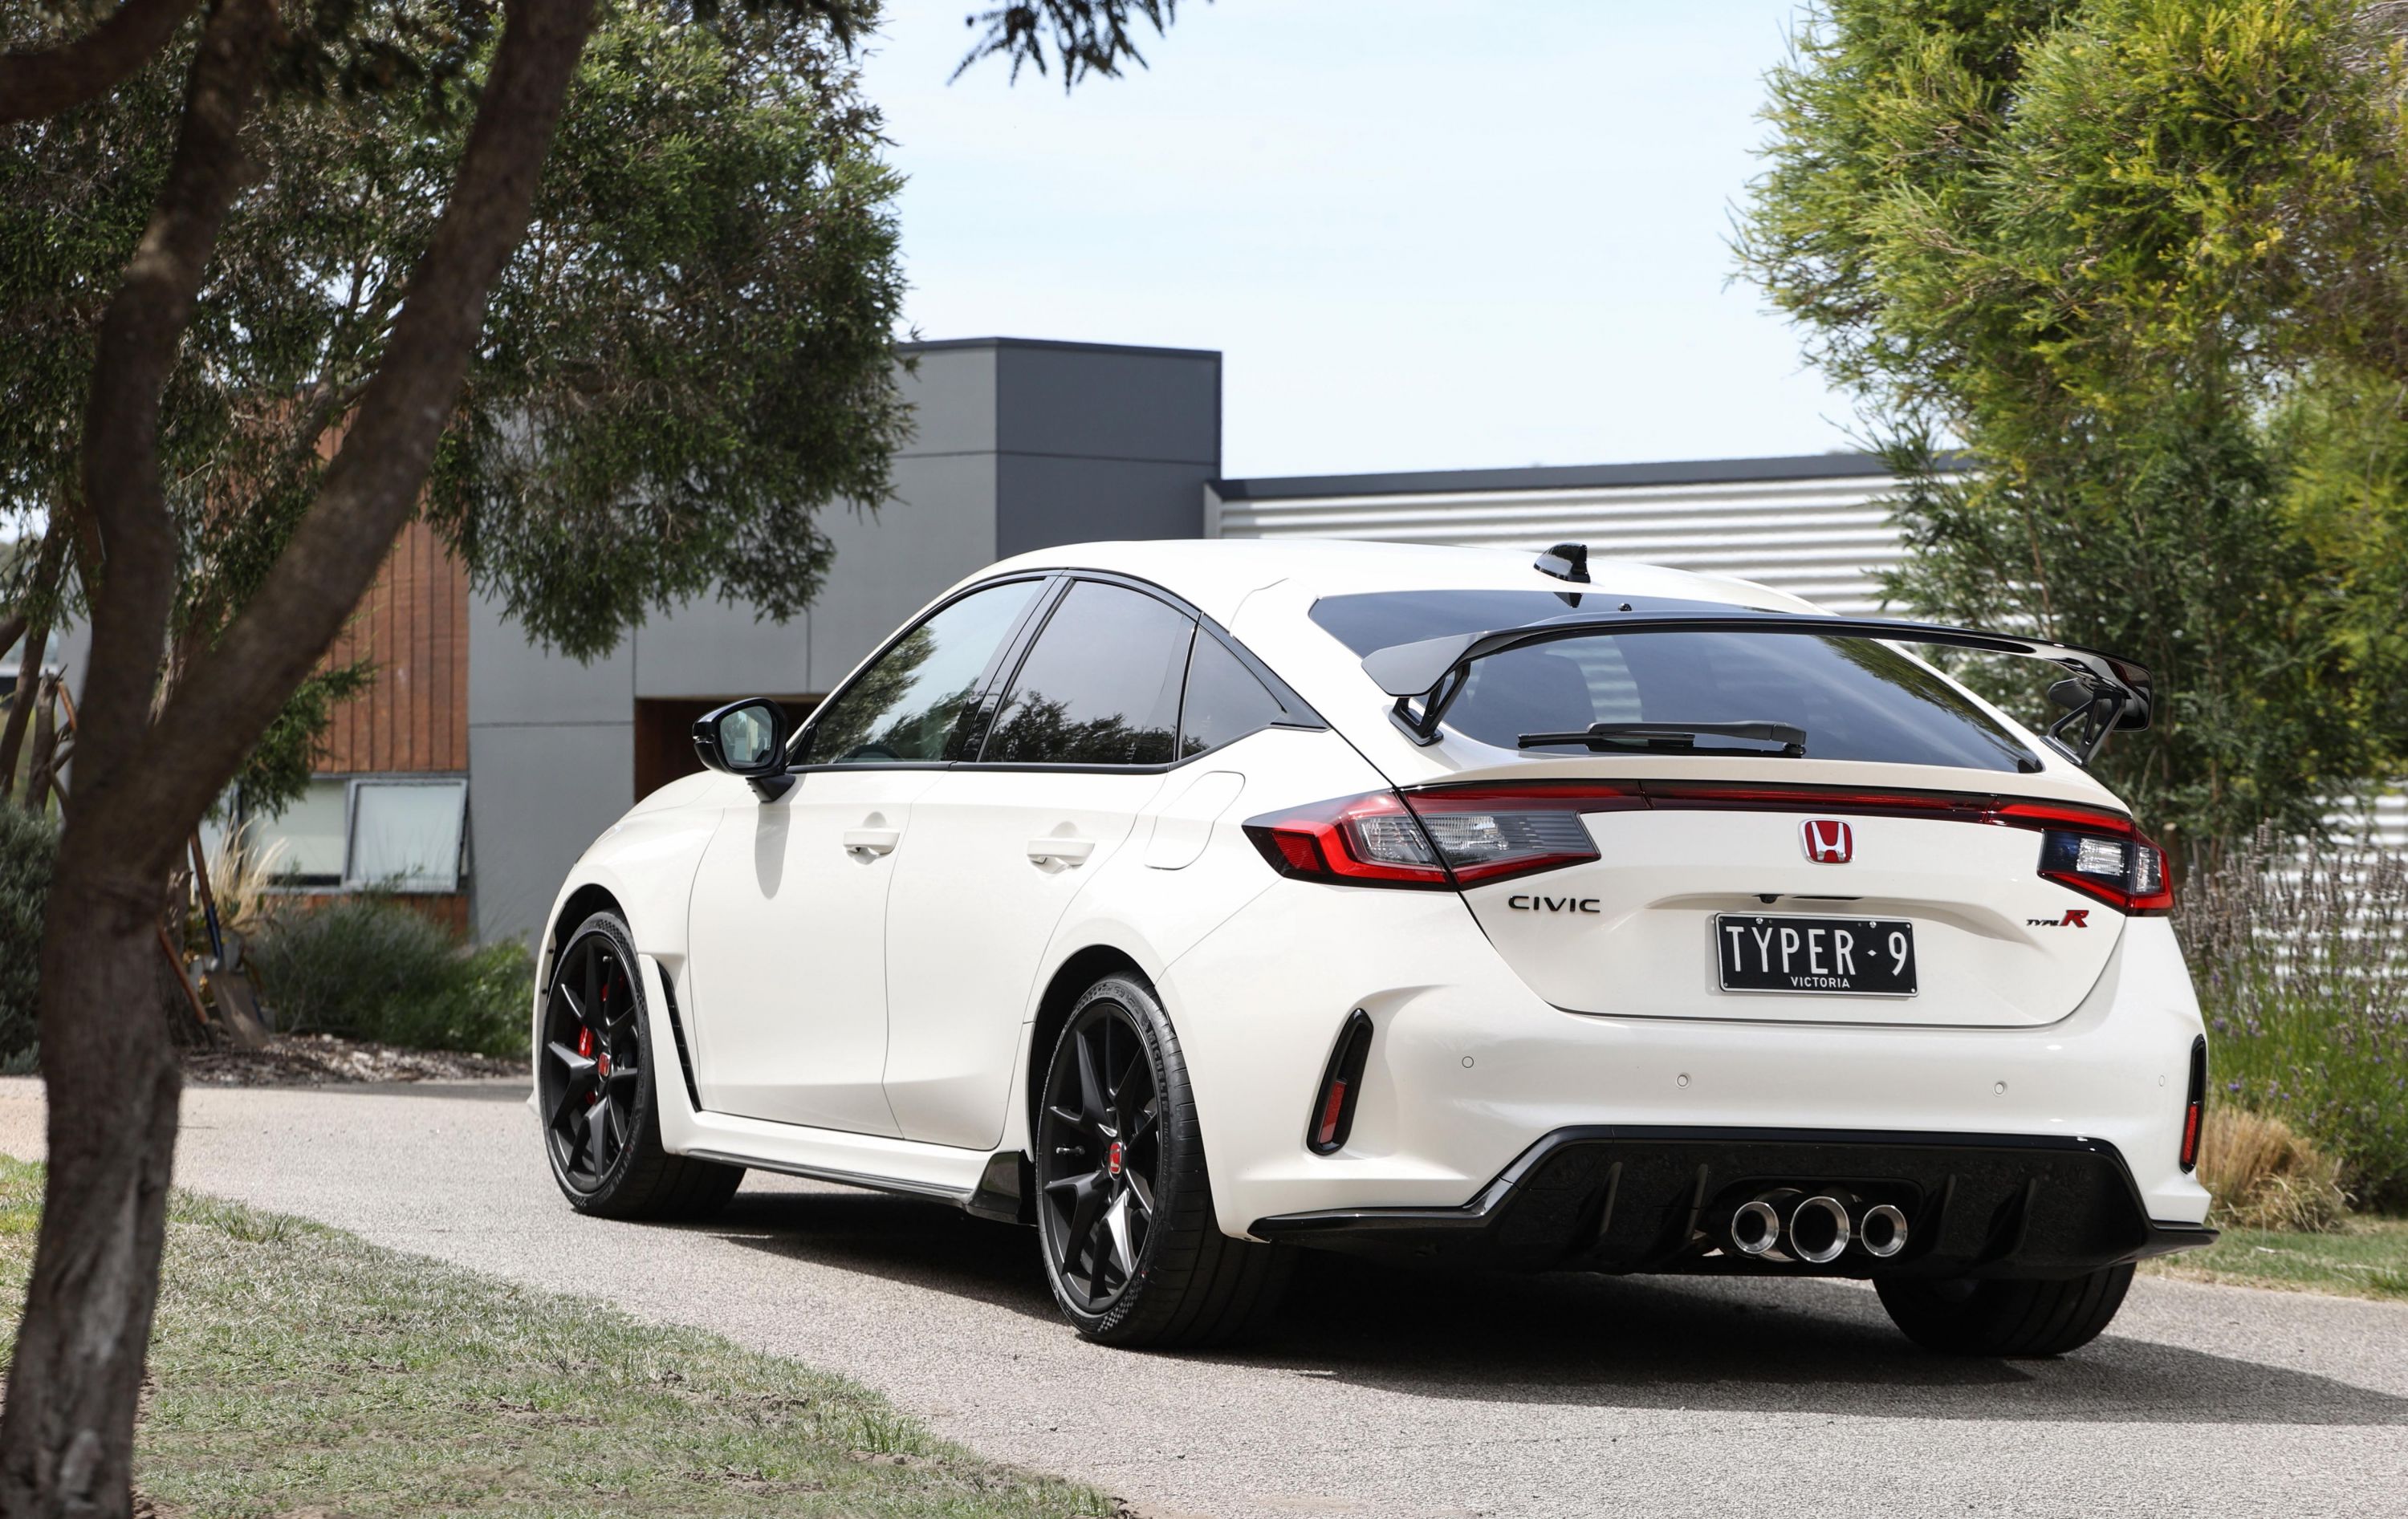 2023 Honda Civic Type R Review: Still the GOAT?